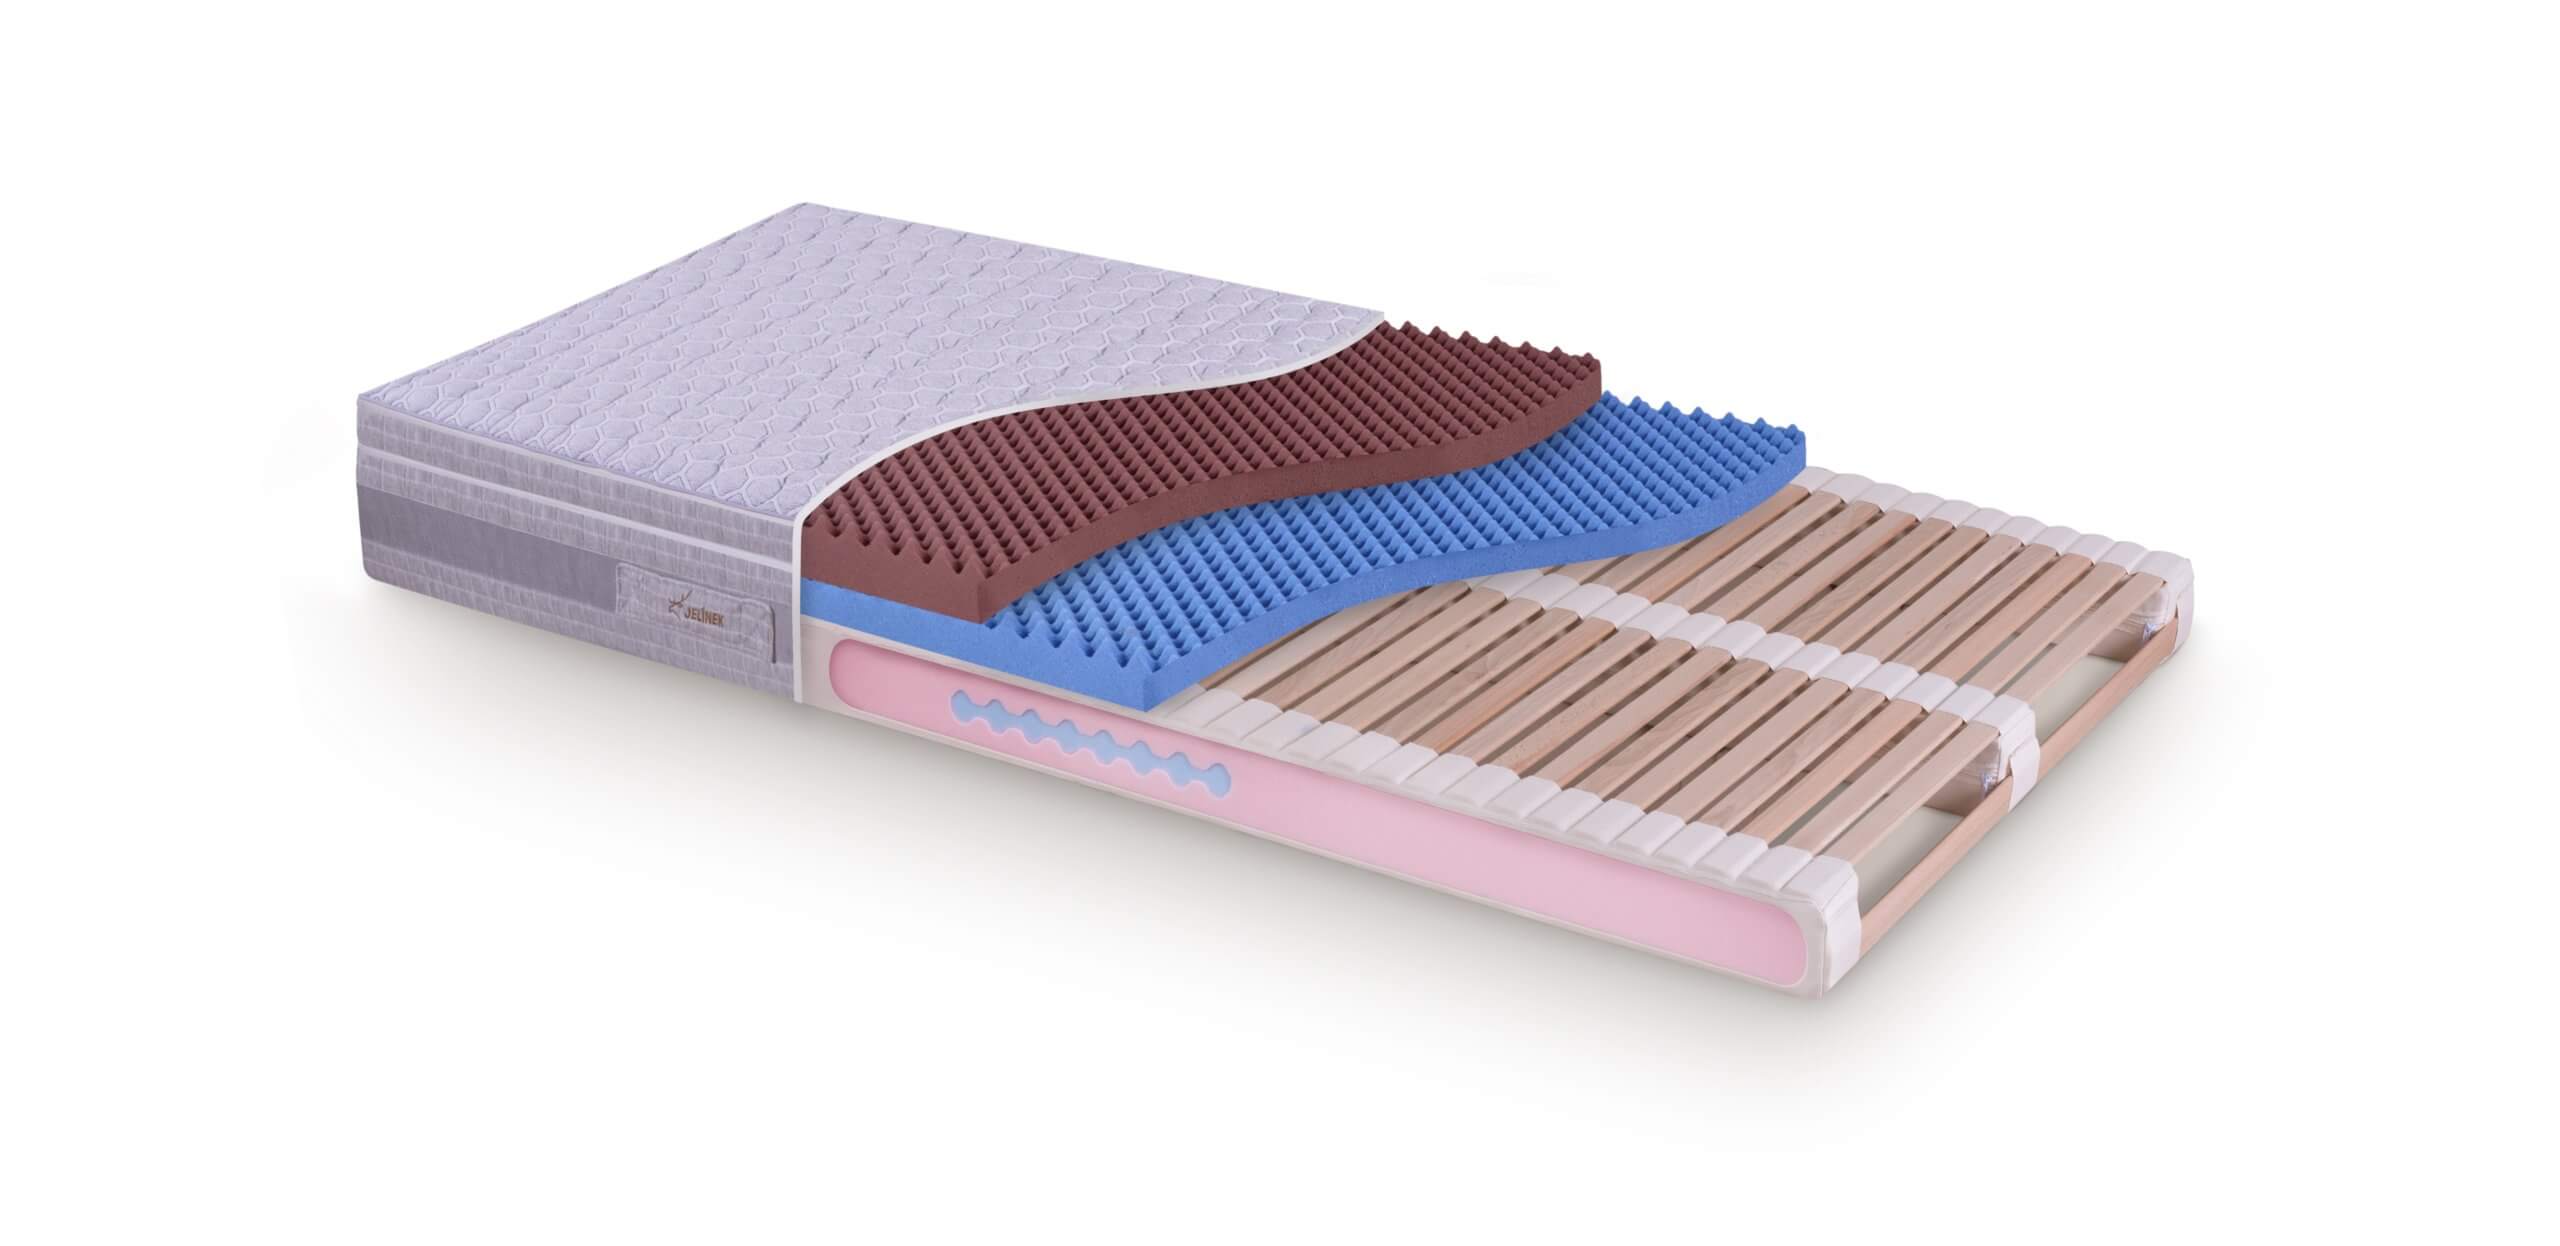 Mattresses suitable for allergy sufferers and asthmatics